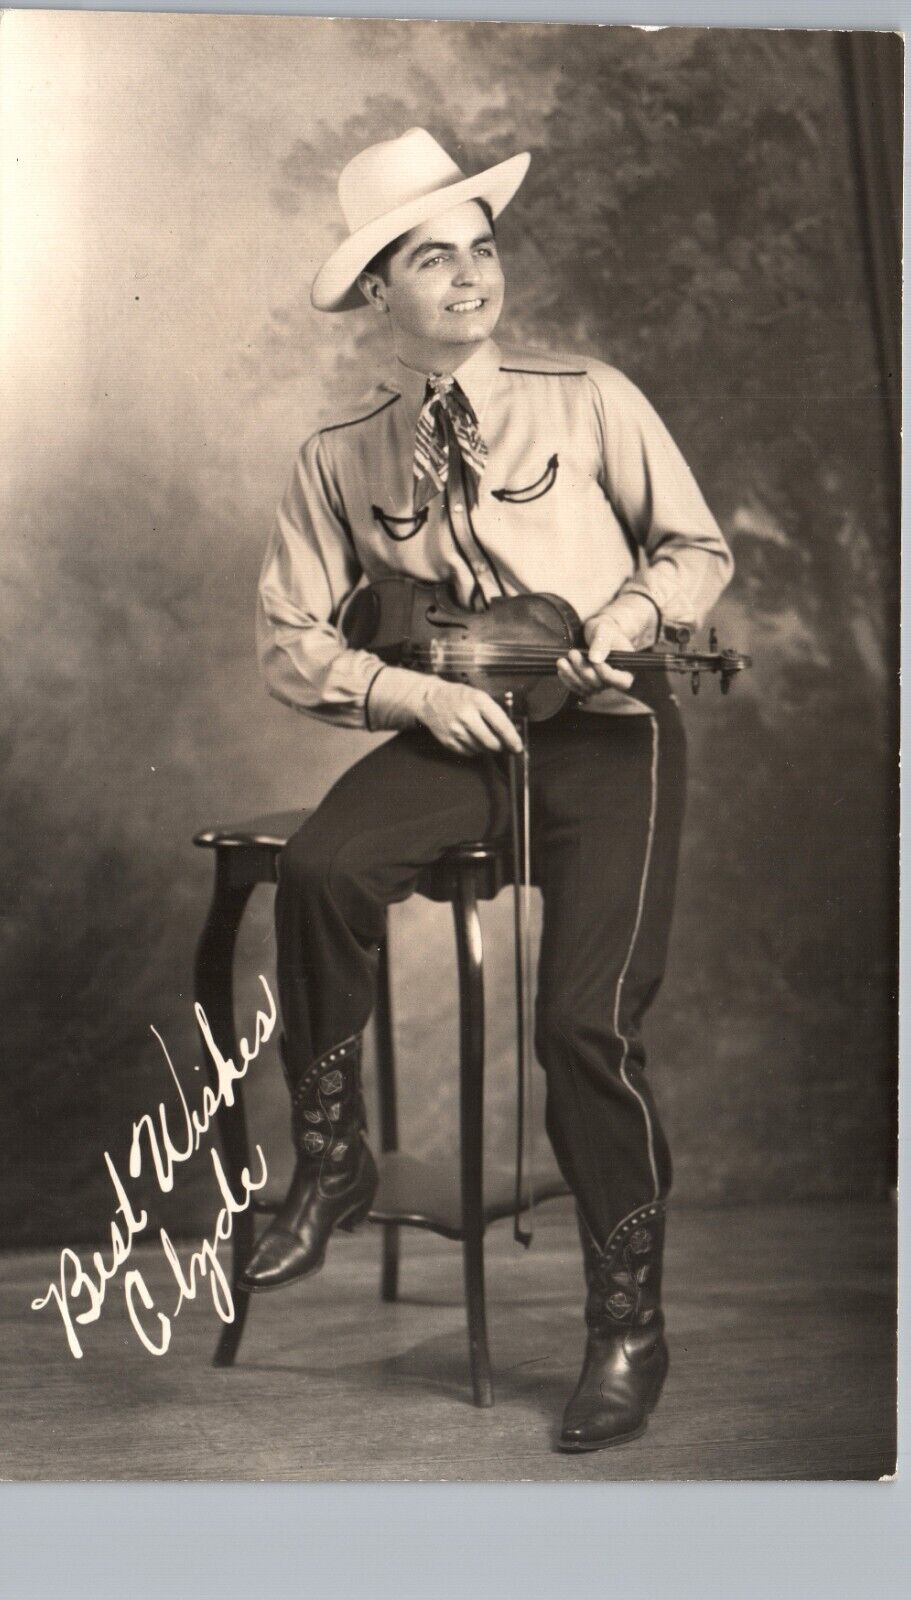 COWBOY & FIDDLE real photo postcard rppc country music singer portrait clyde